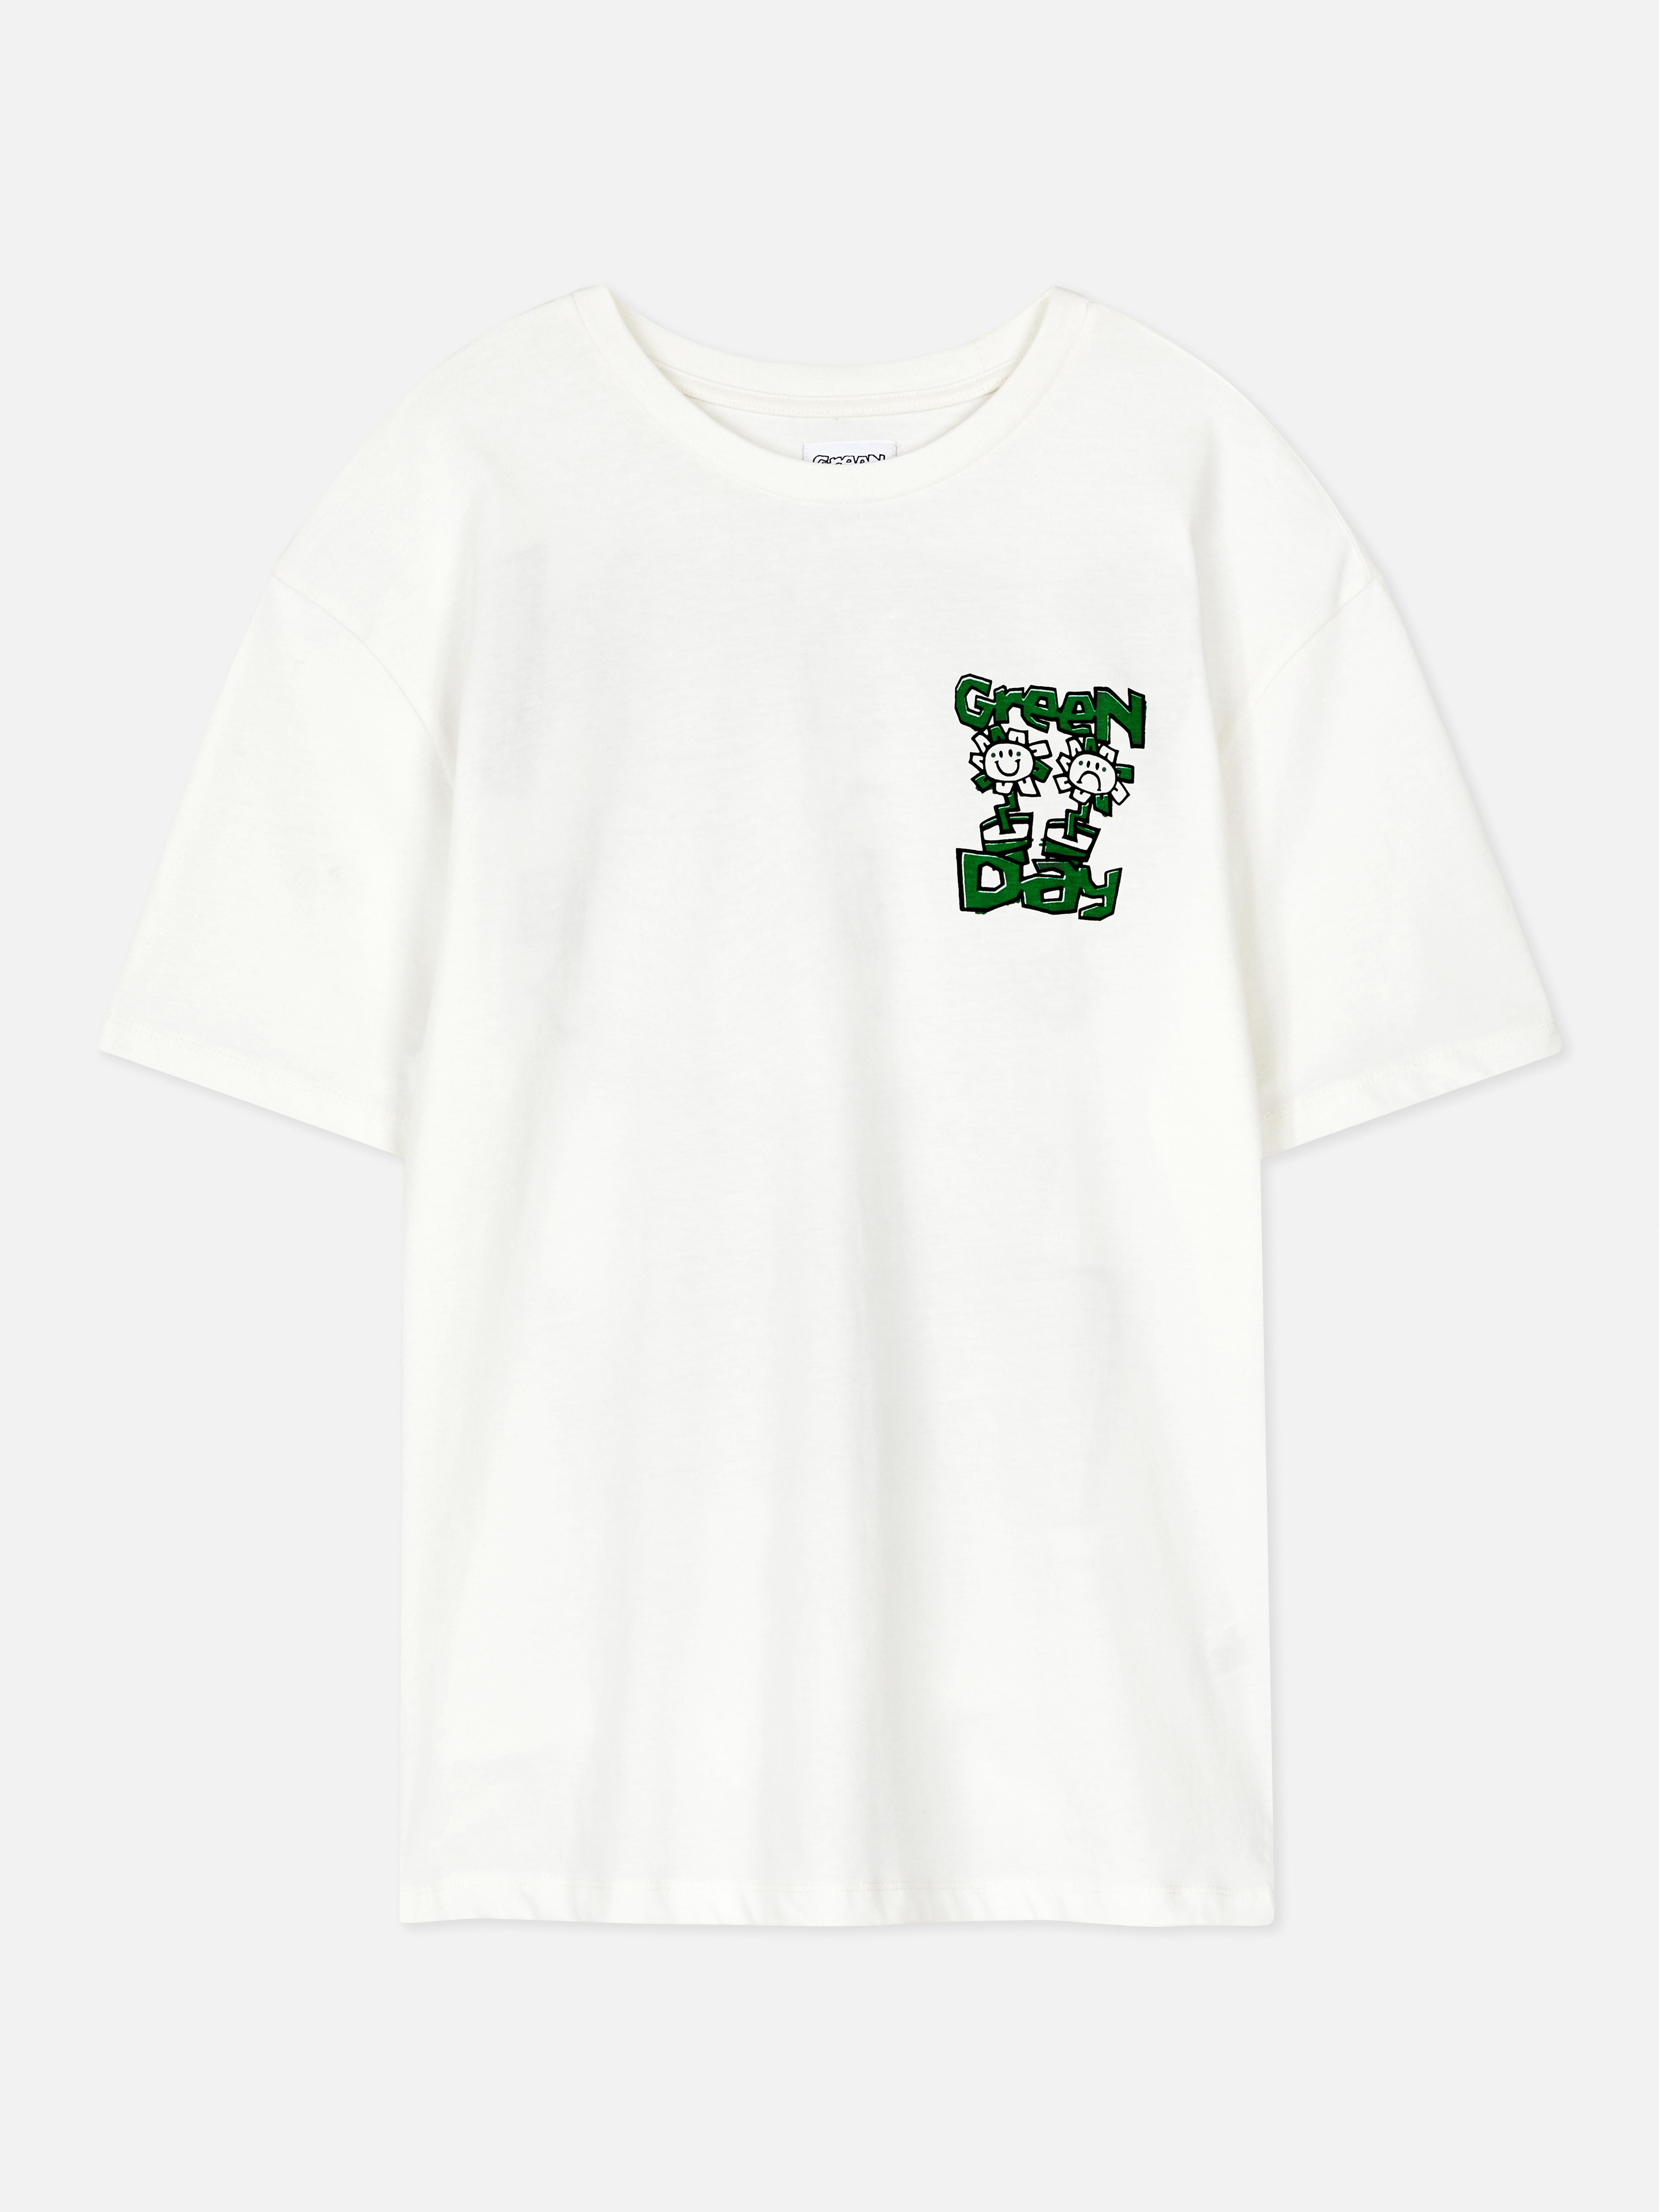 Green Day Graphic T-Shirt